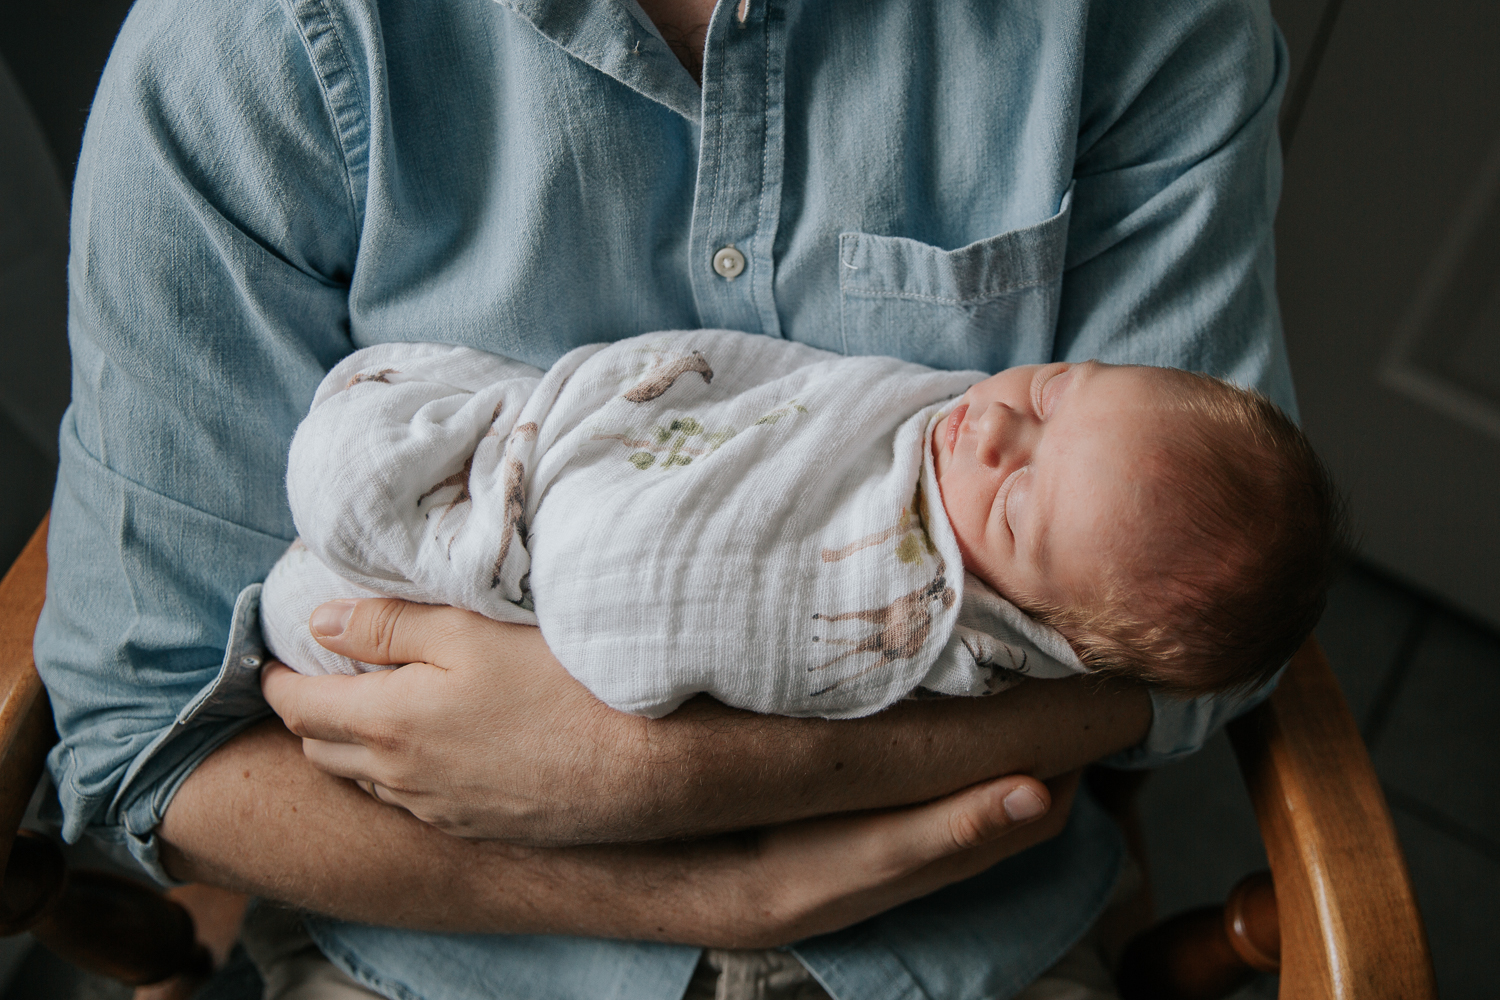 new father in blue button down shirt sitting in nursery glider holding sleeping 3 week old baby boy with red hair - Stouffville In-Home Photography